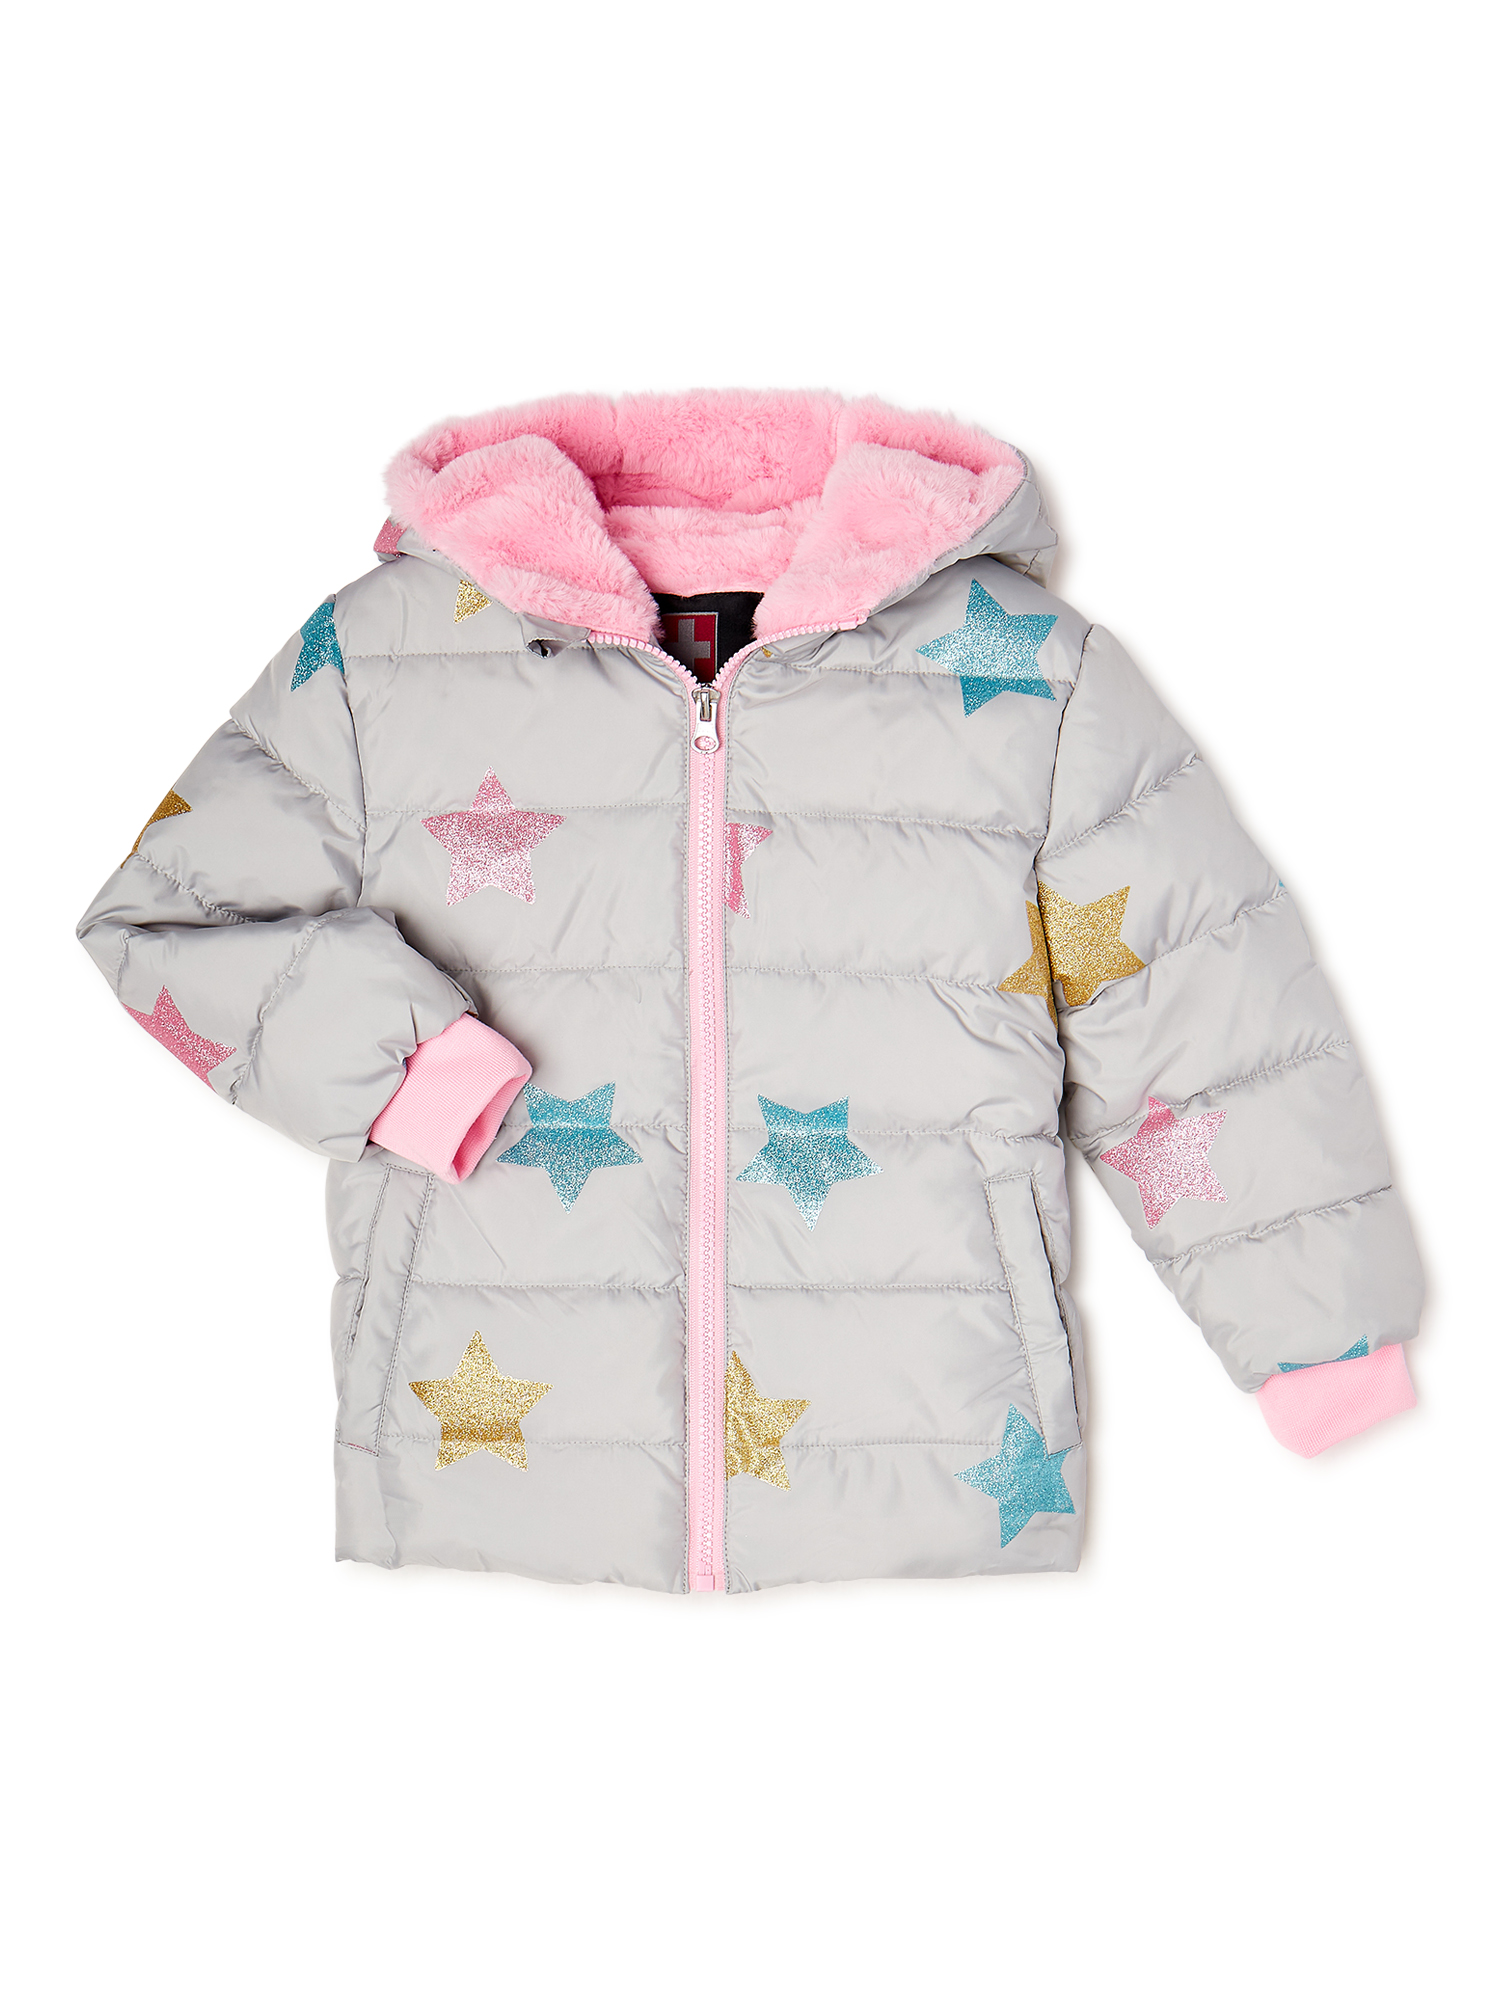 Swiss Tech Baby and Toddler Girl Puffer Jacket, Sizes 12M-5T - image 1 of 3